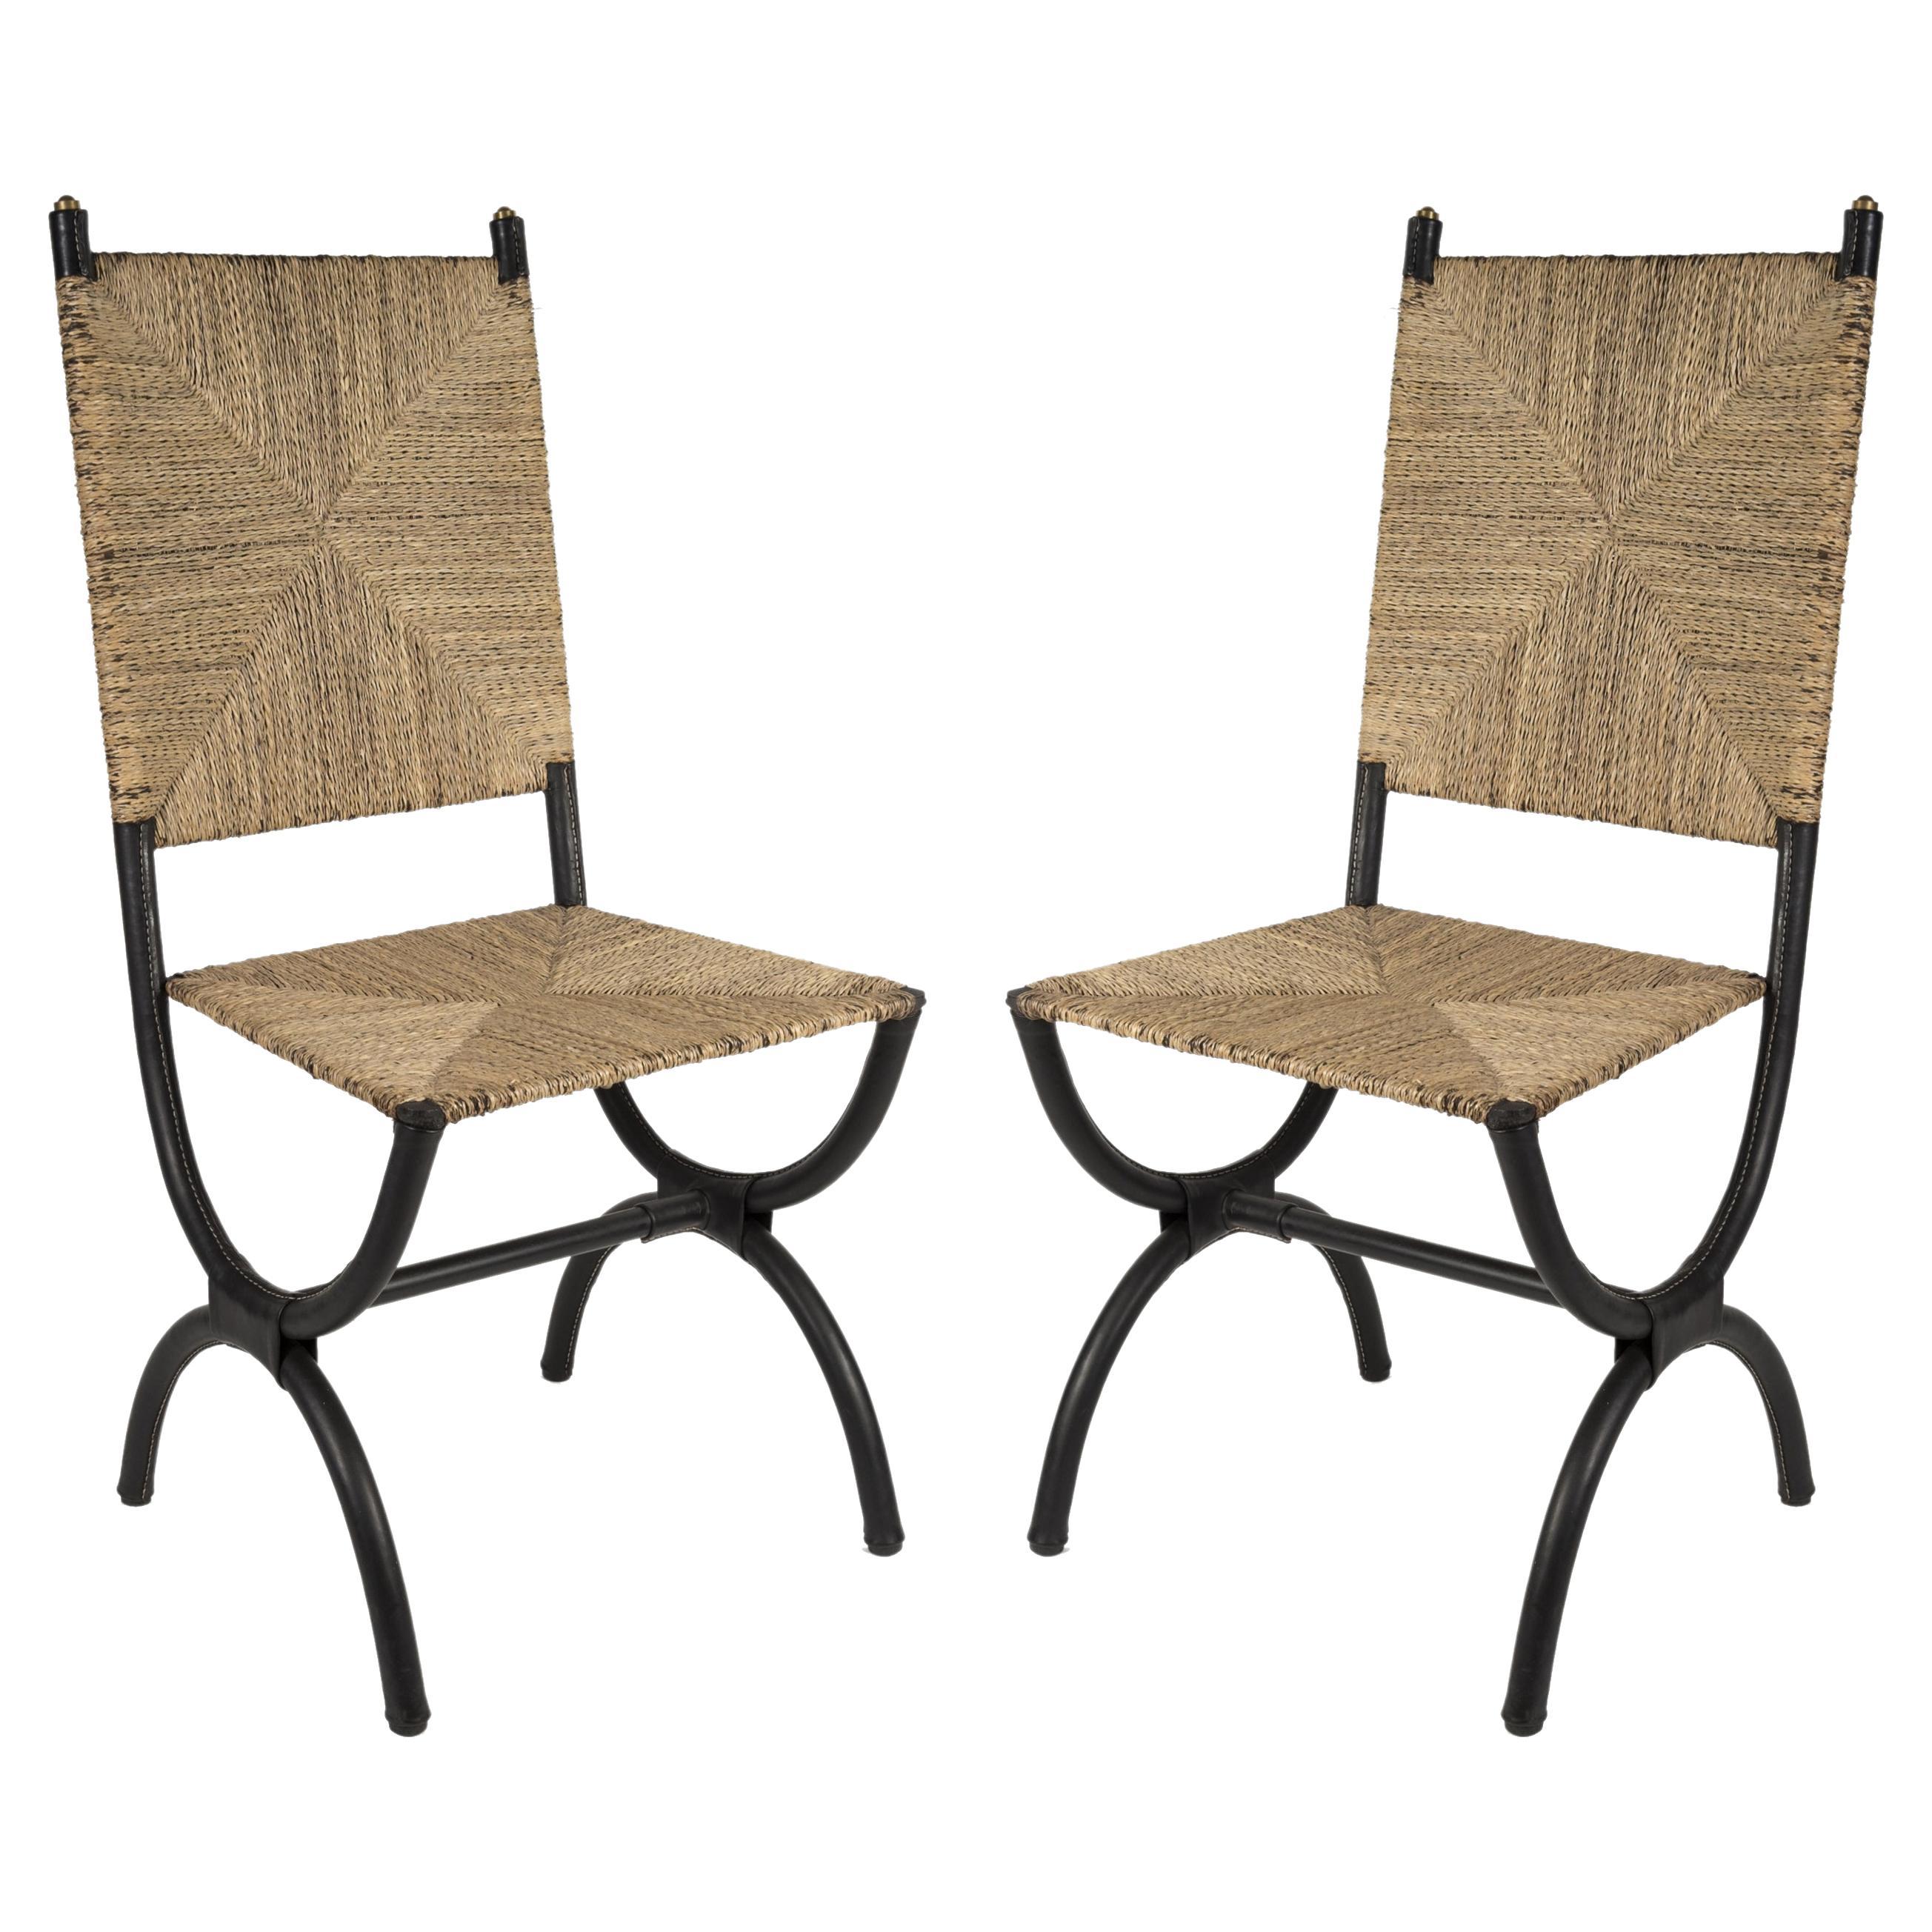 1950's Stitched Leather and Rope Pair of Chairs by Jacques Adnet